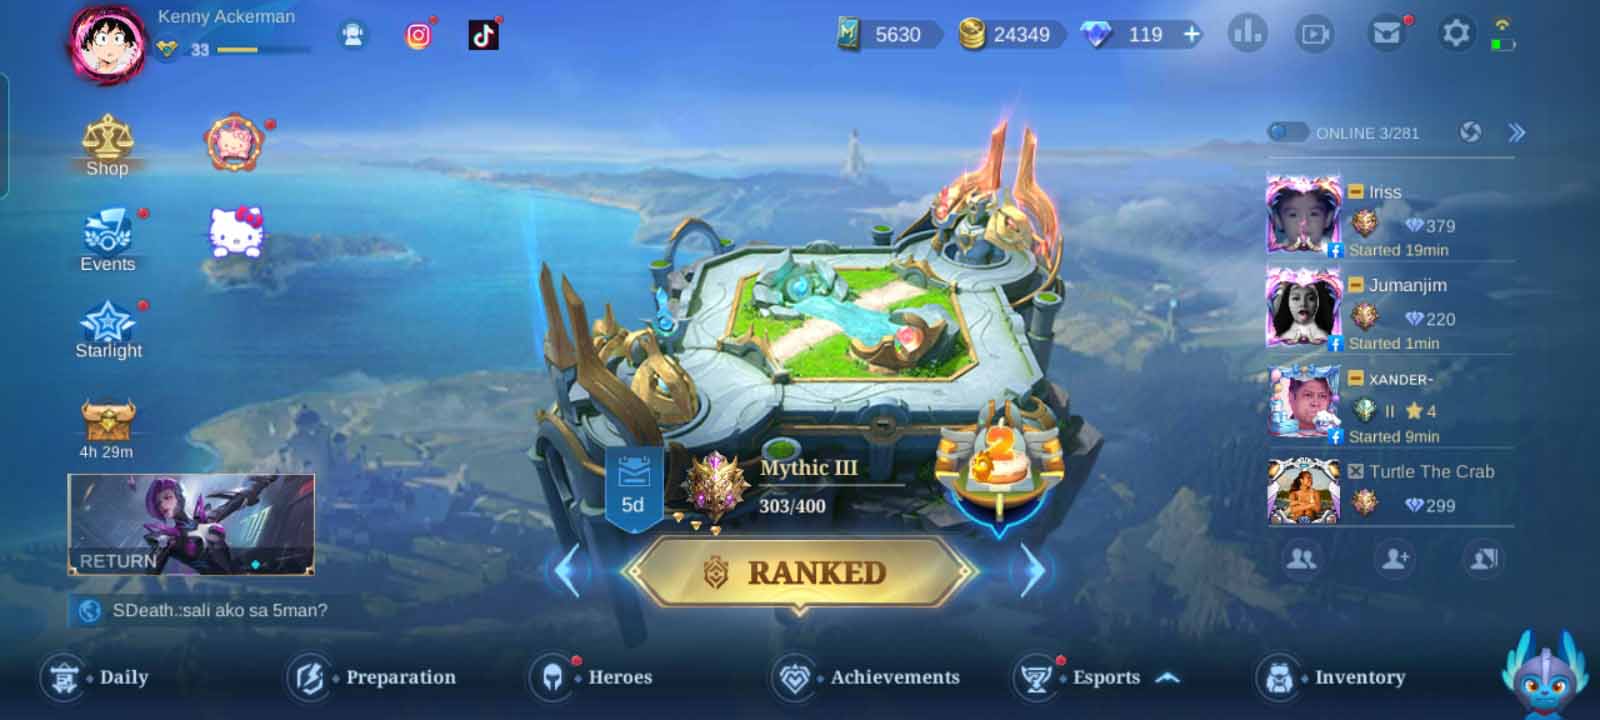 How to Play Mobile Legends on PC Guide (Updated 2021)-Game Guides